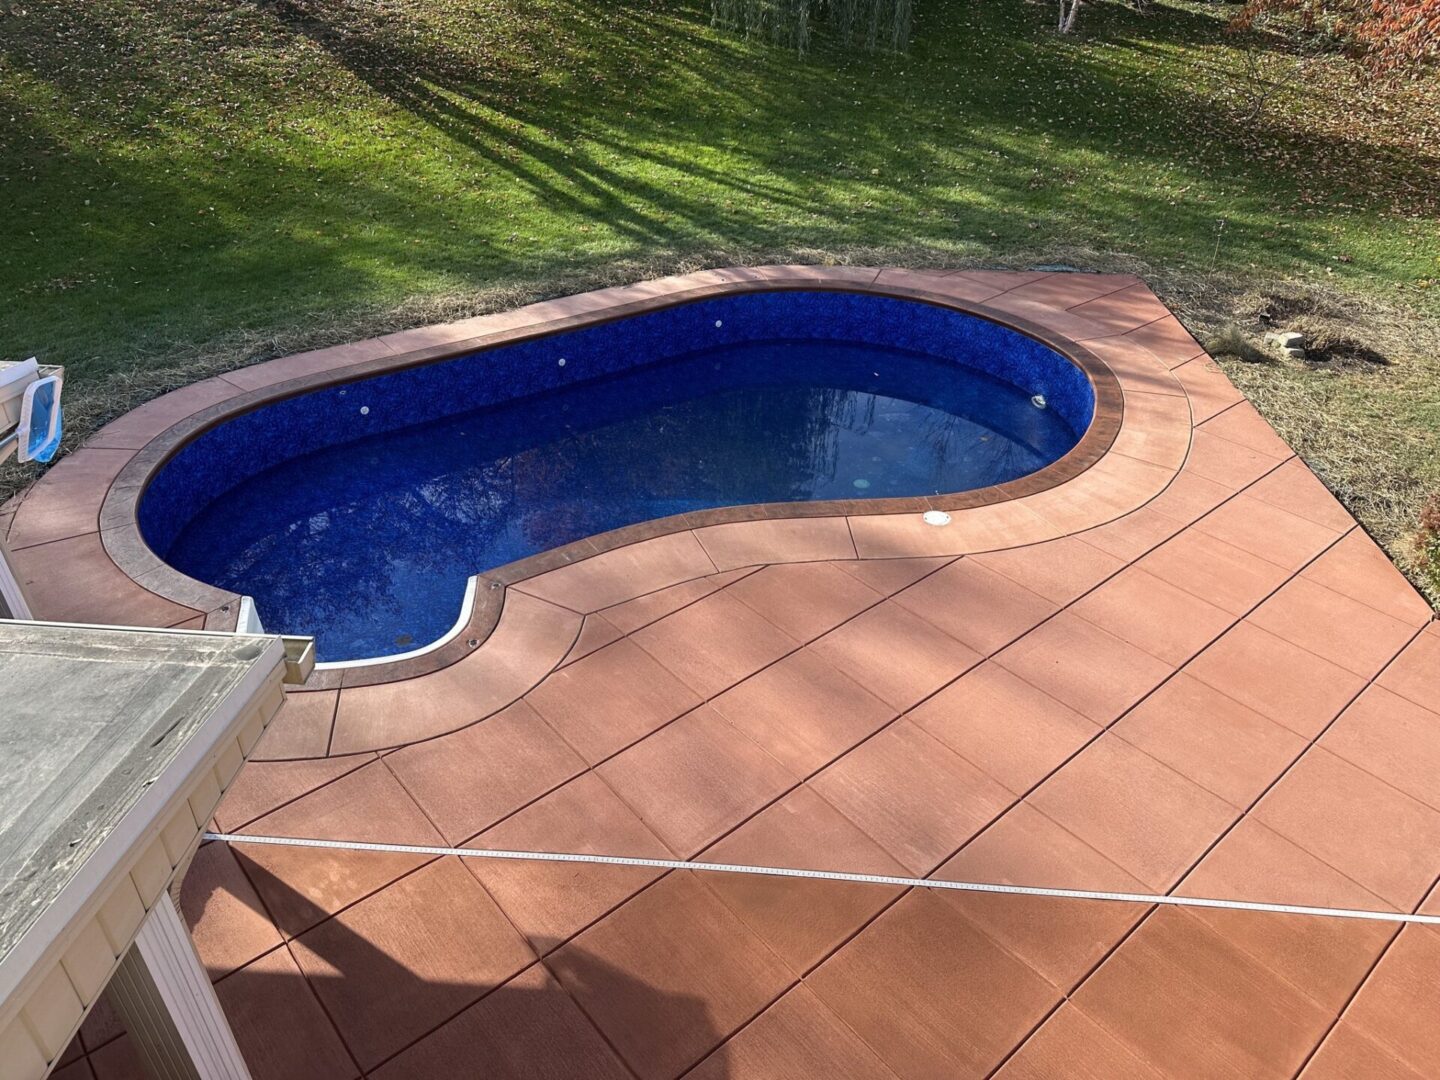 A pool that is in the shape of a heart.